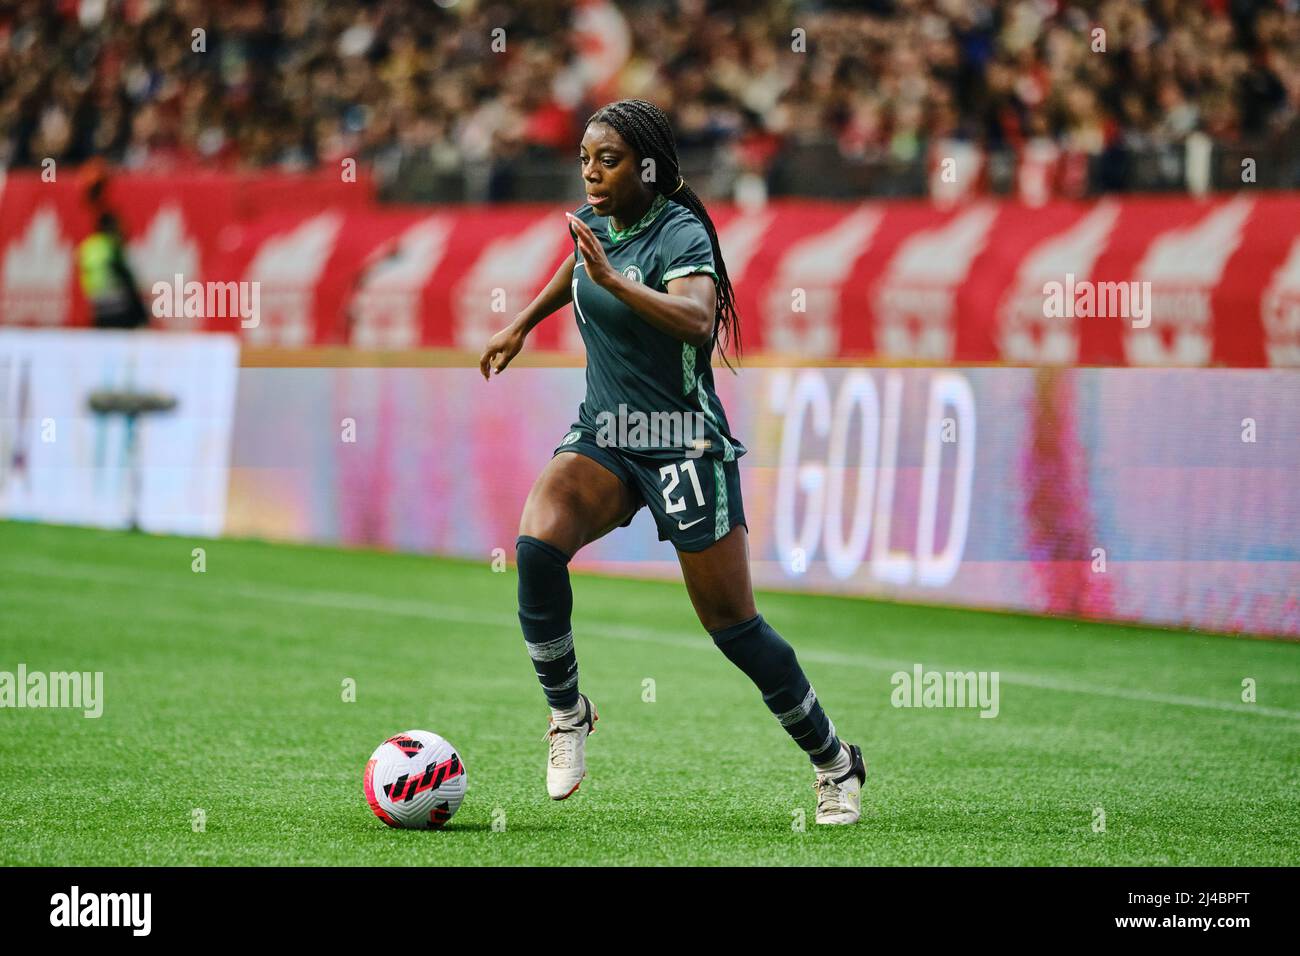 Vancouver, British Columbia, Canada. 8th April, 2022. Payne Nicole Oyeyemisi of Team Nigeria during the first Canada Soccer’s Women’s National Team Ce Stock Photo